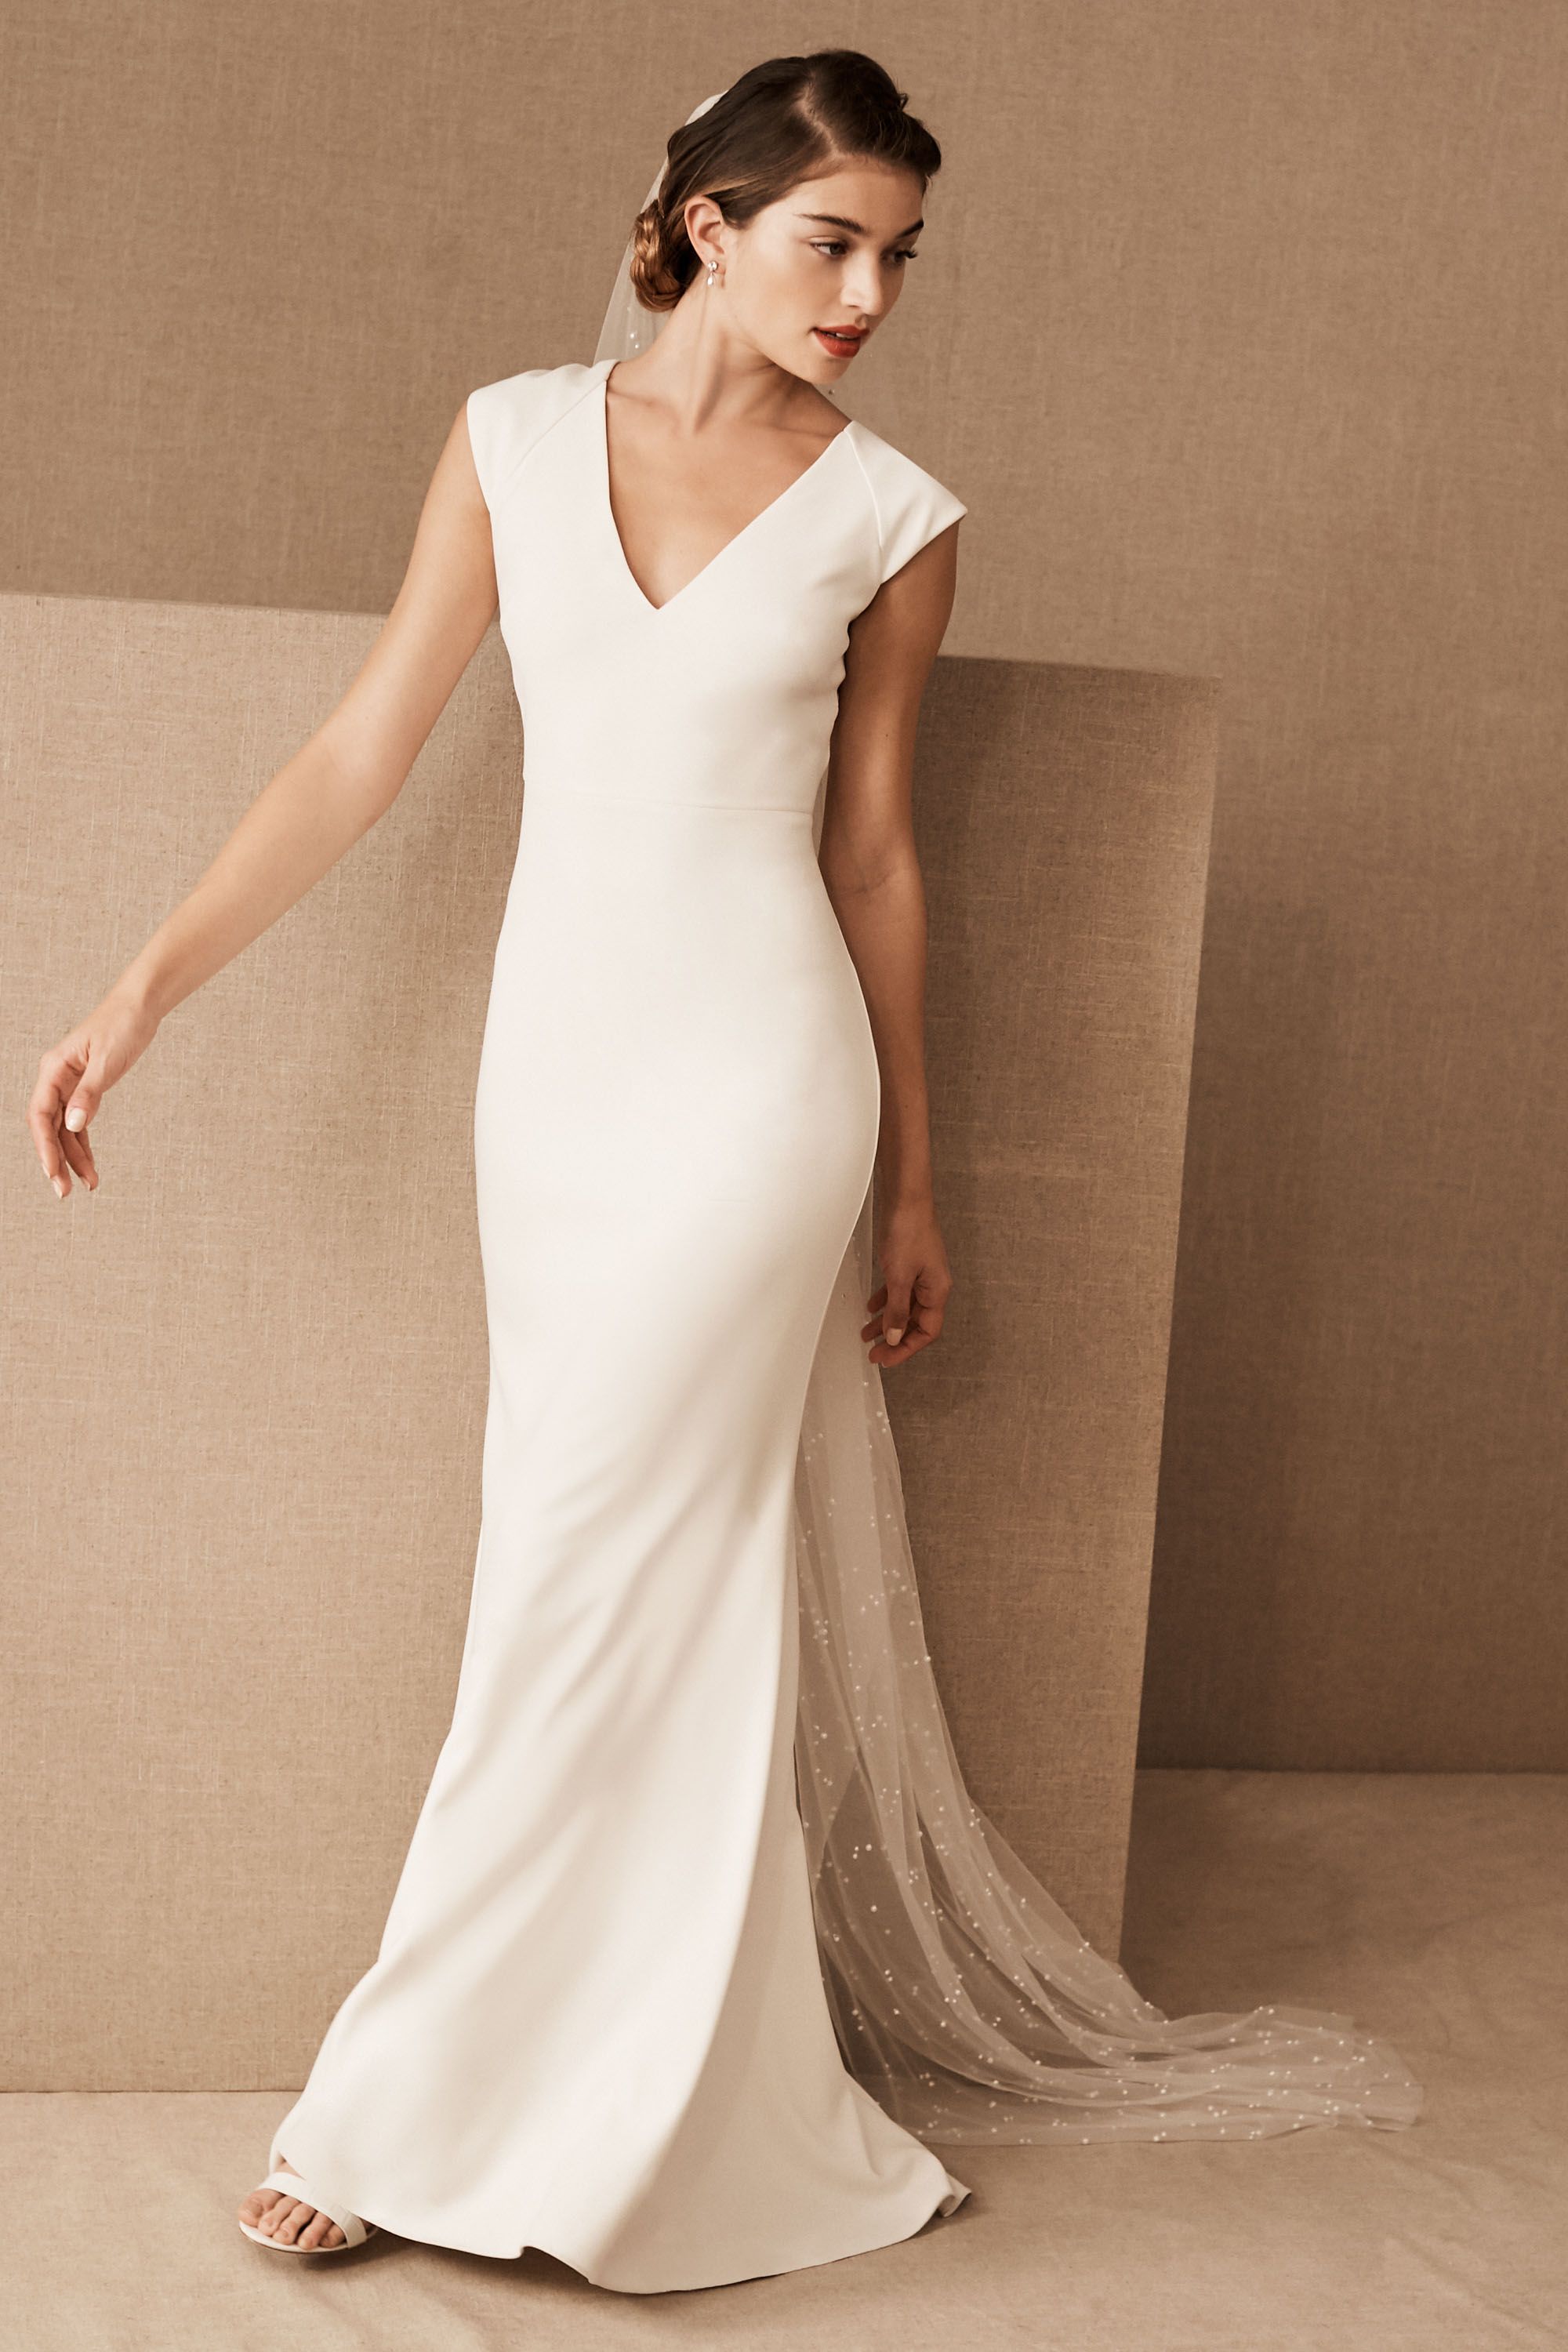 Photo for white dresses that could be wedding dresses